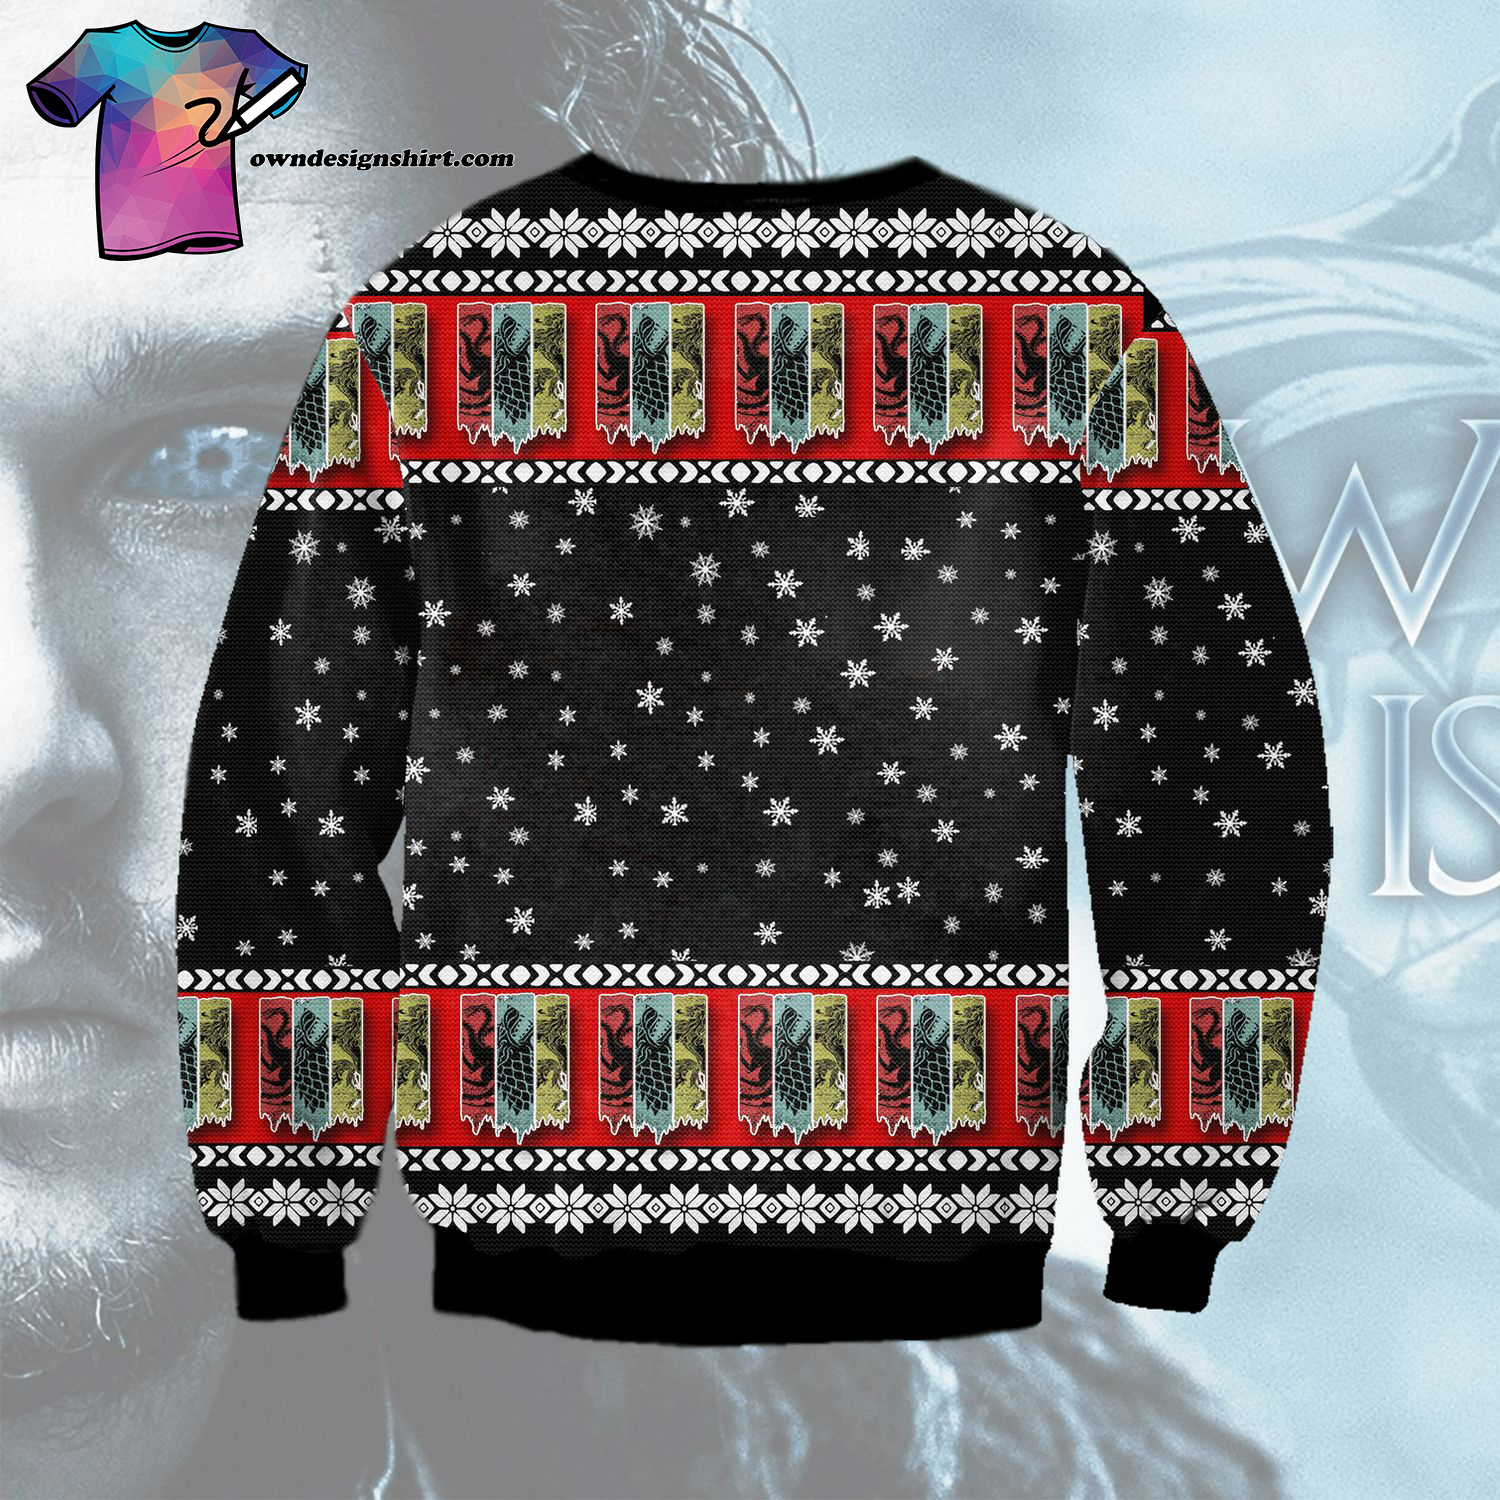 Game of Thrones Merry Christmas All Over Print Ugly Christmas Sweater